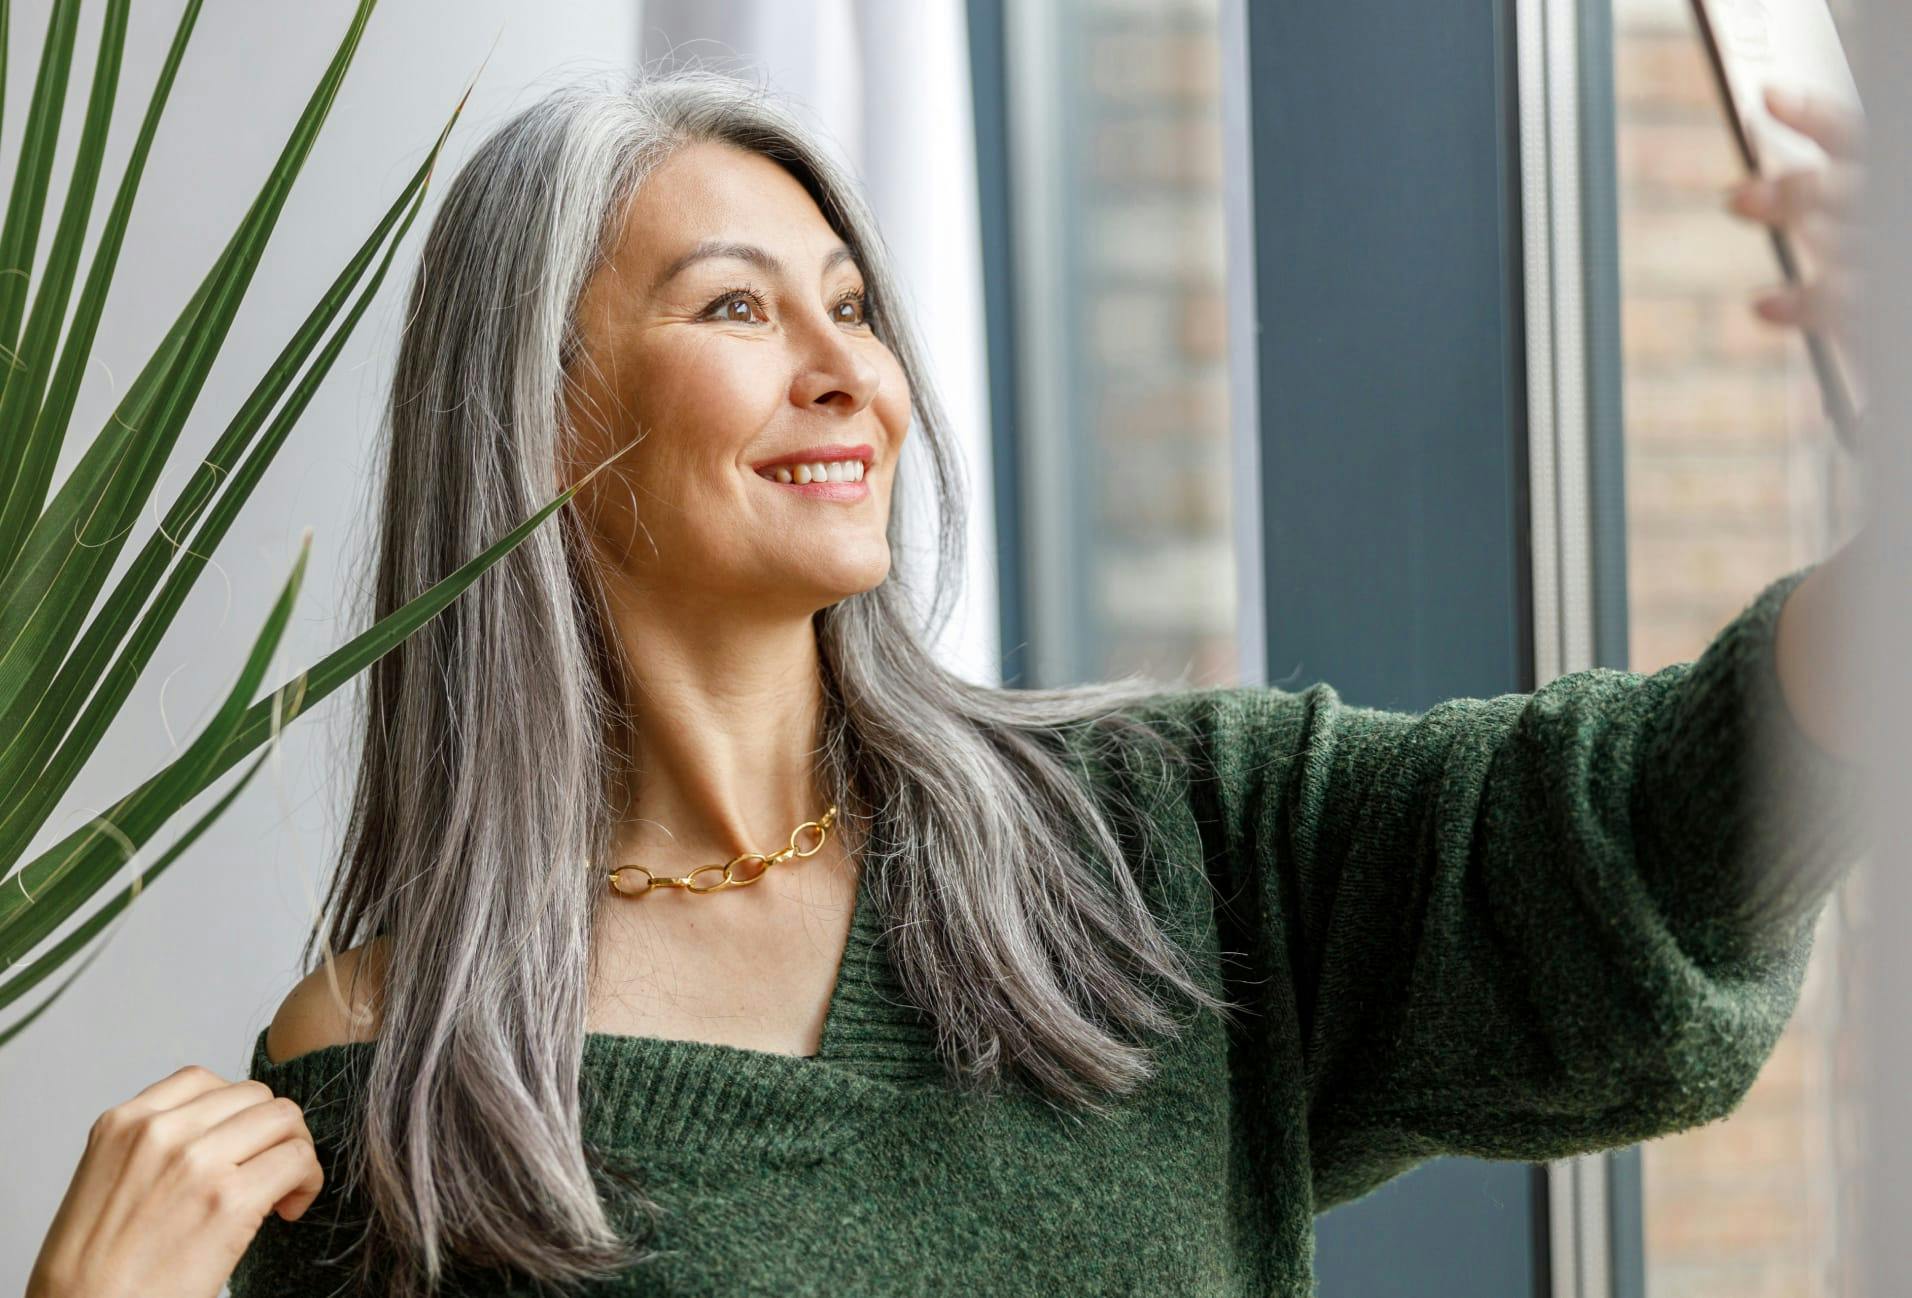 woman with long grey hair wearing a green sweater